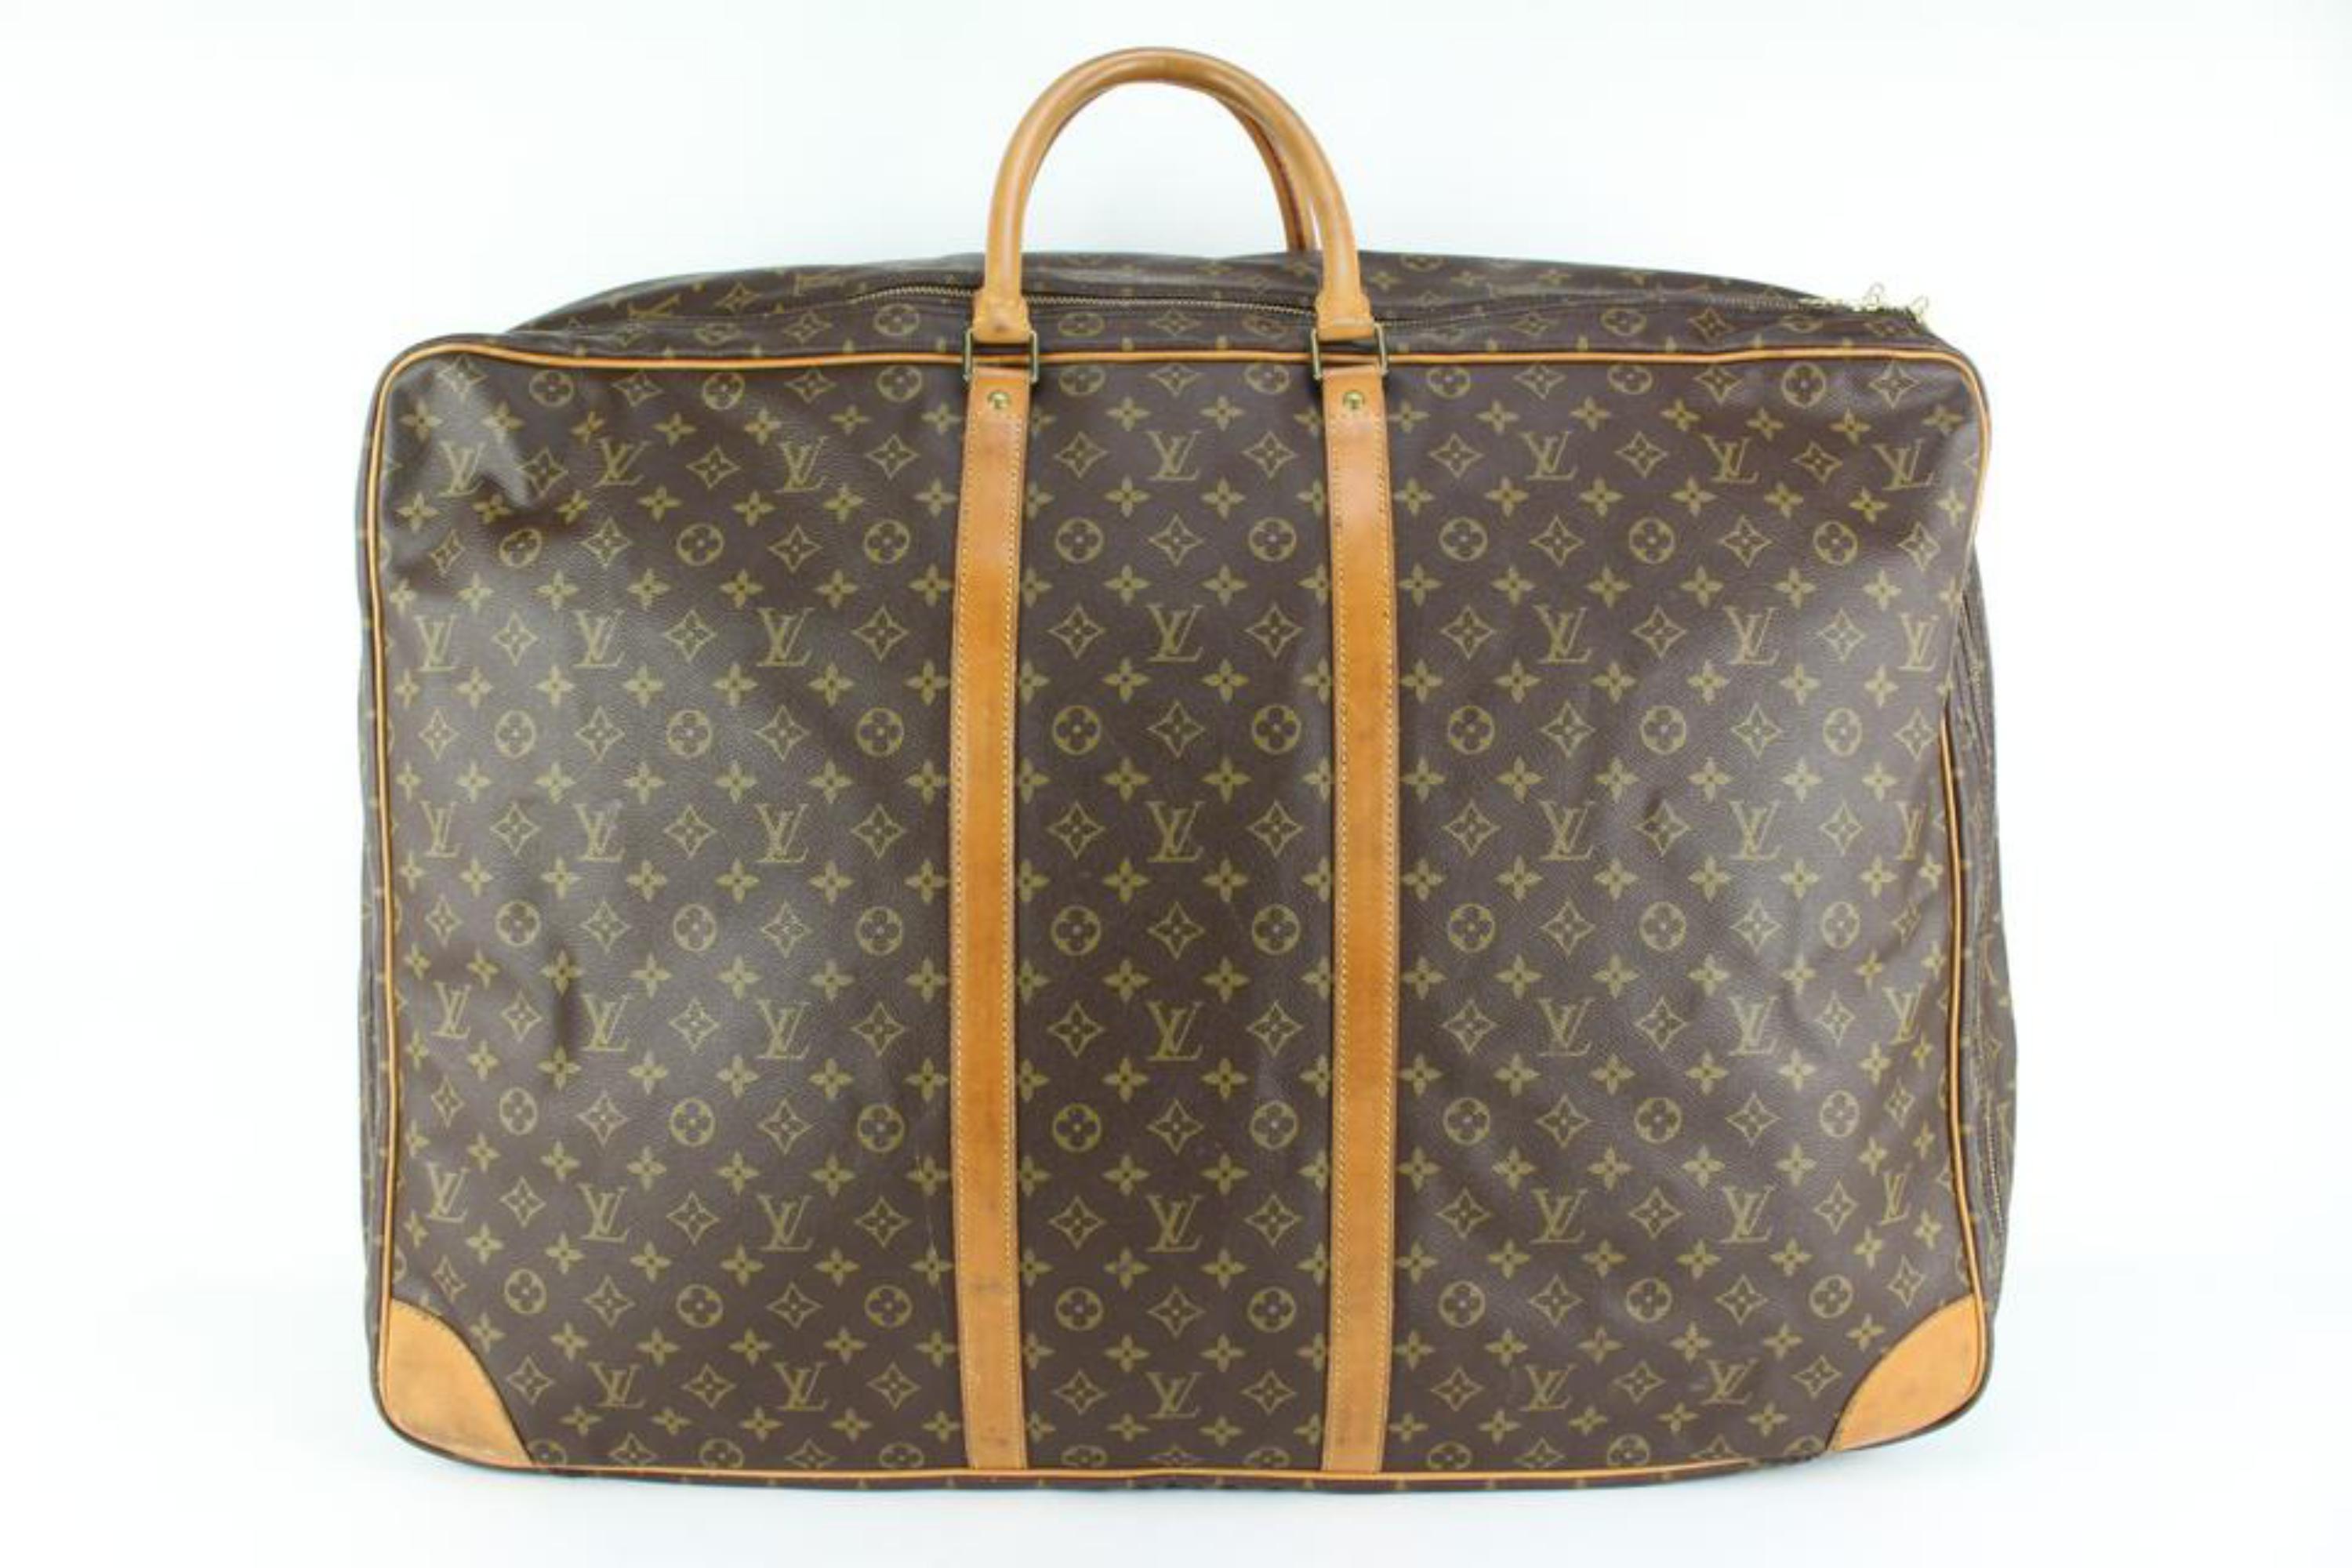 Louis Vuitton Monogram Sirius 70 Soft Suitcase Luggage 87lk513s In Fair Condition For Sale In Dix hills, NY